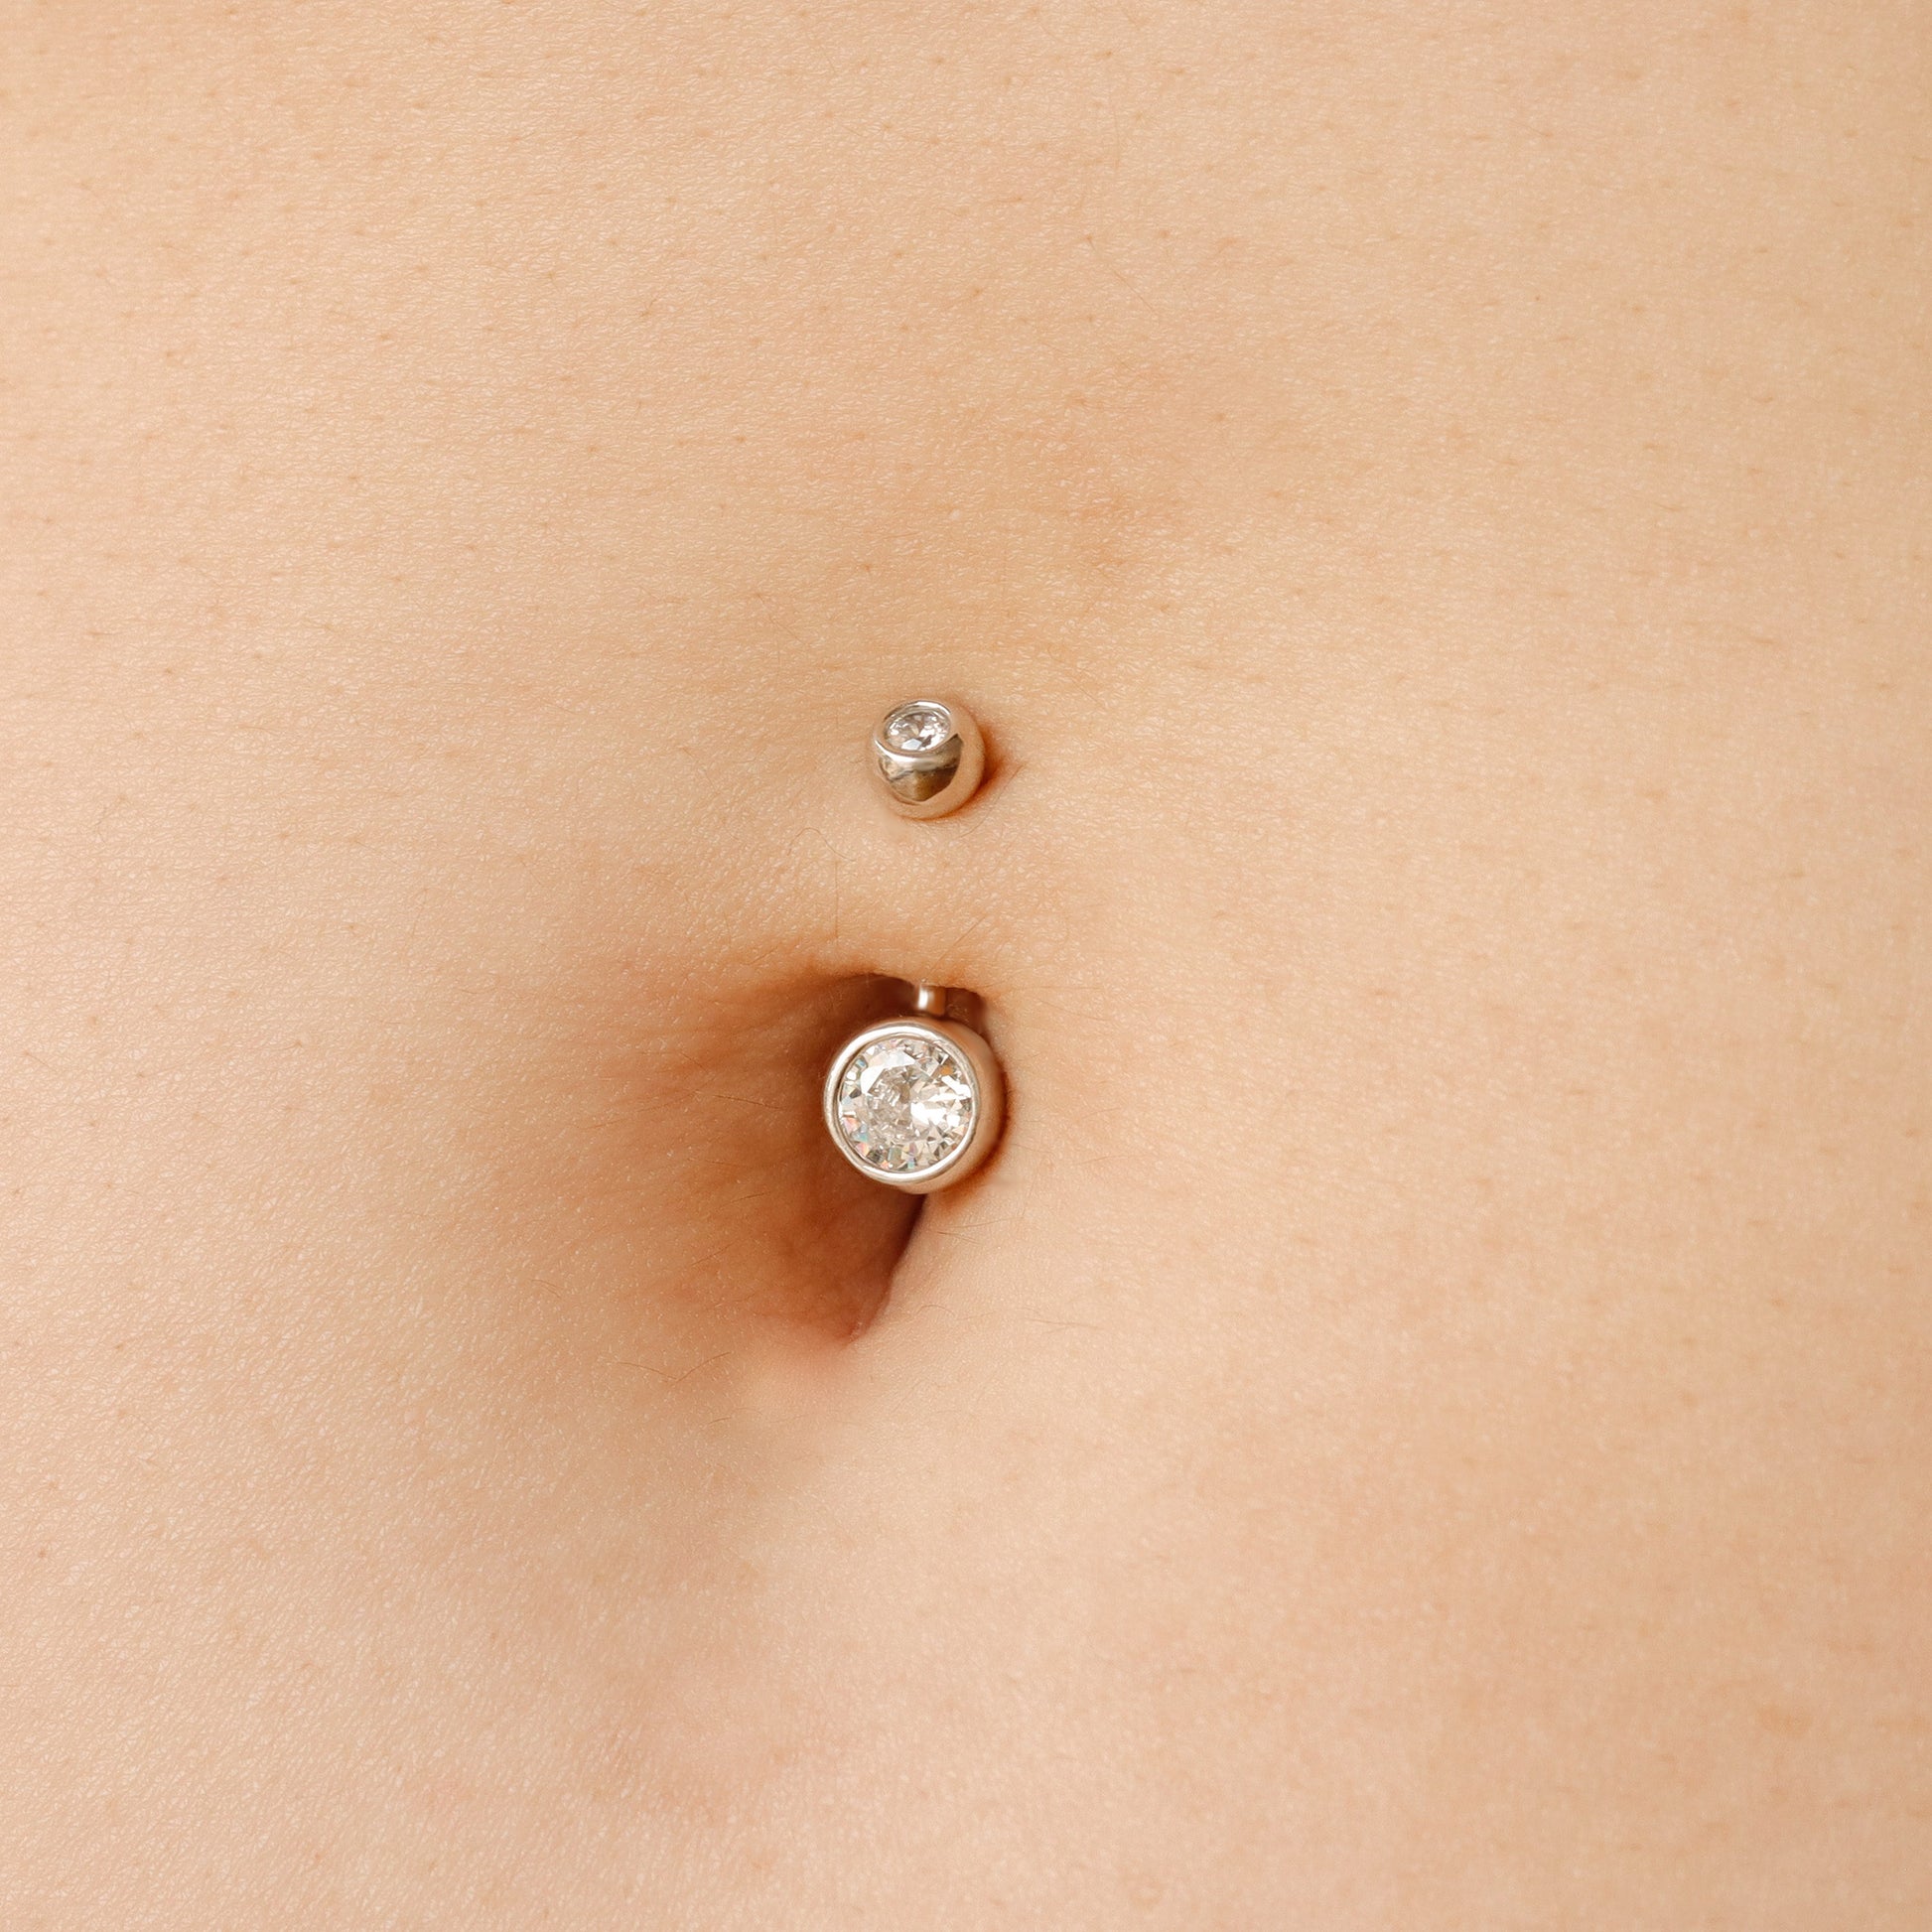 CZ belly button ring